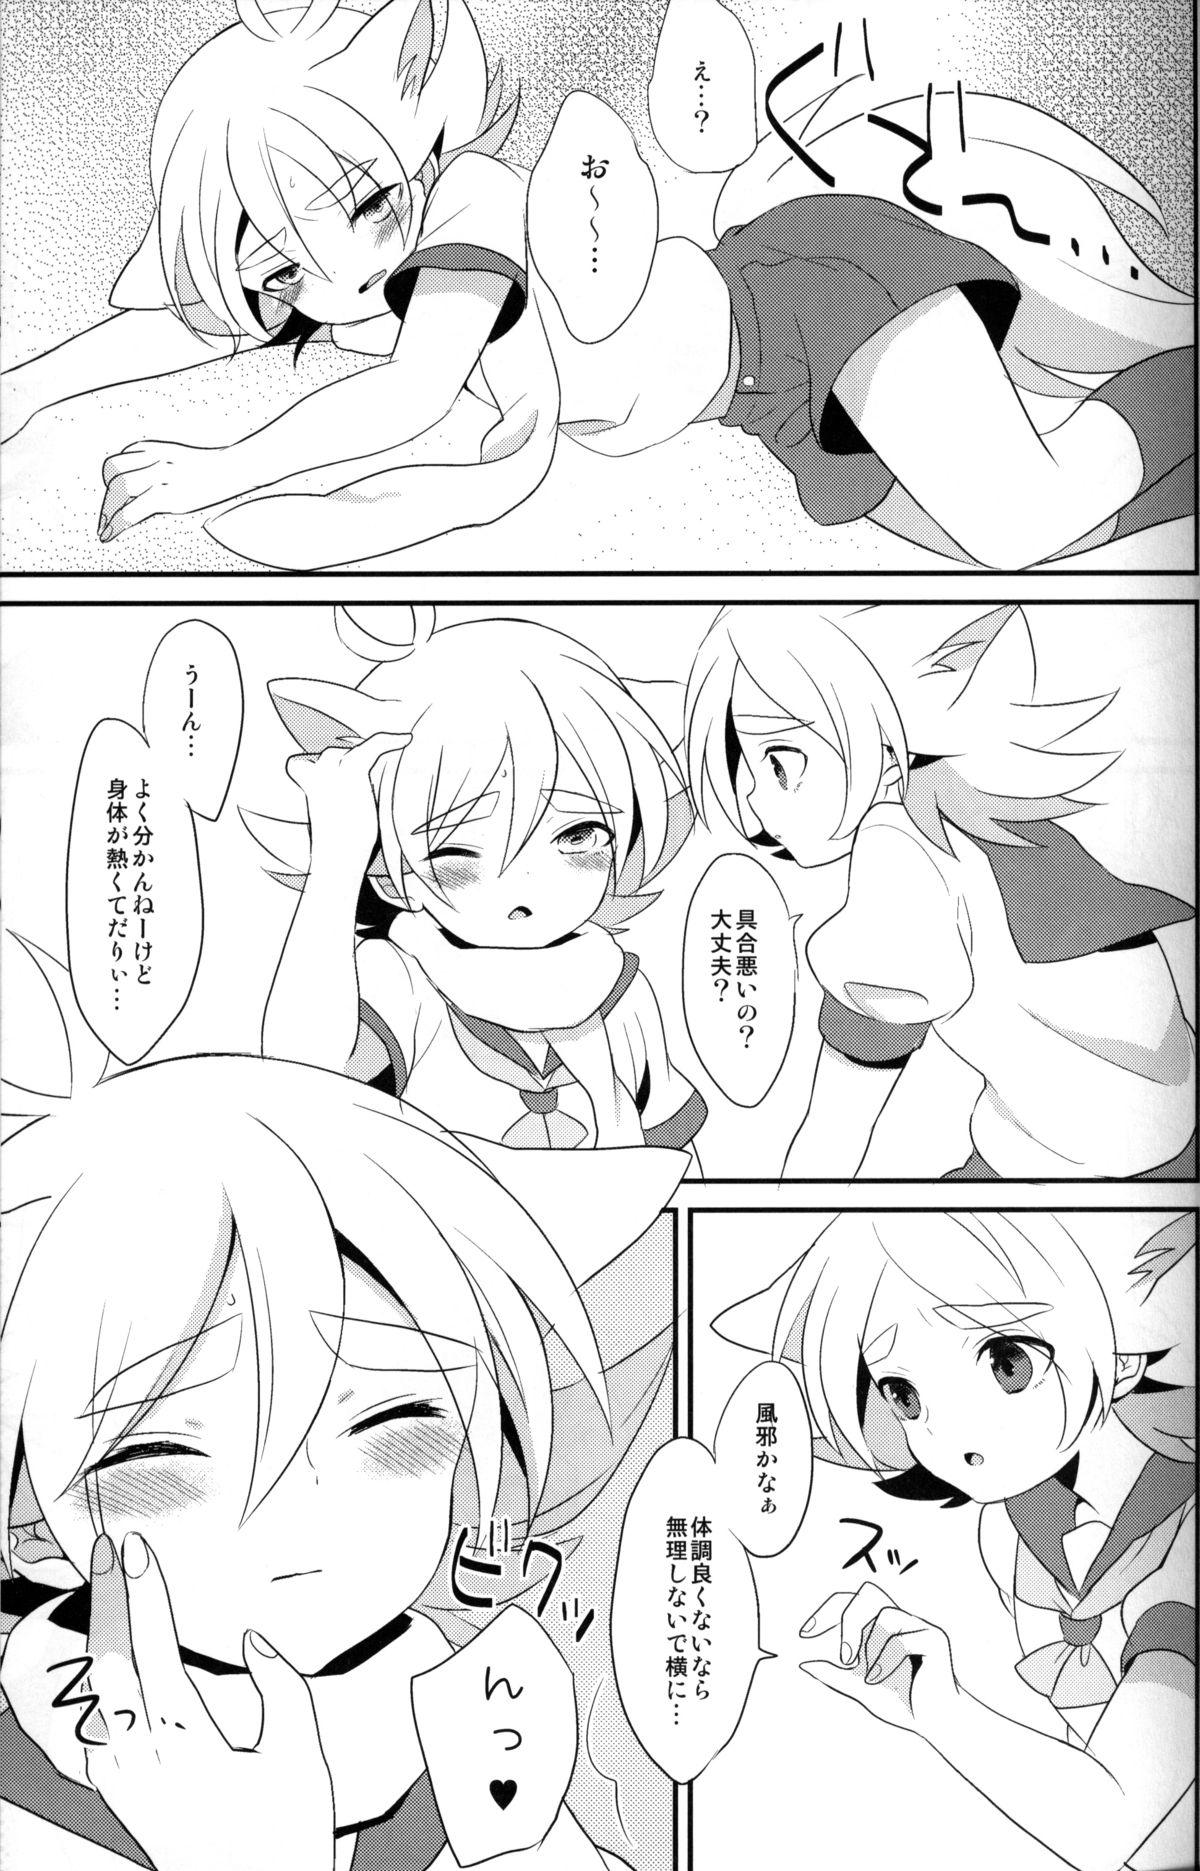 Whipping unripe fruits - Inazuma eleven Doctor - Page 4